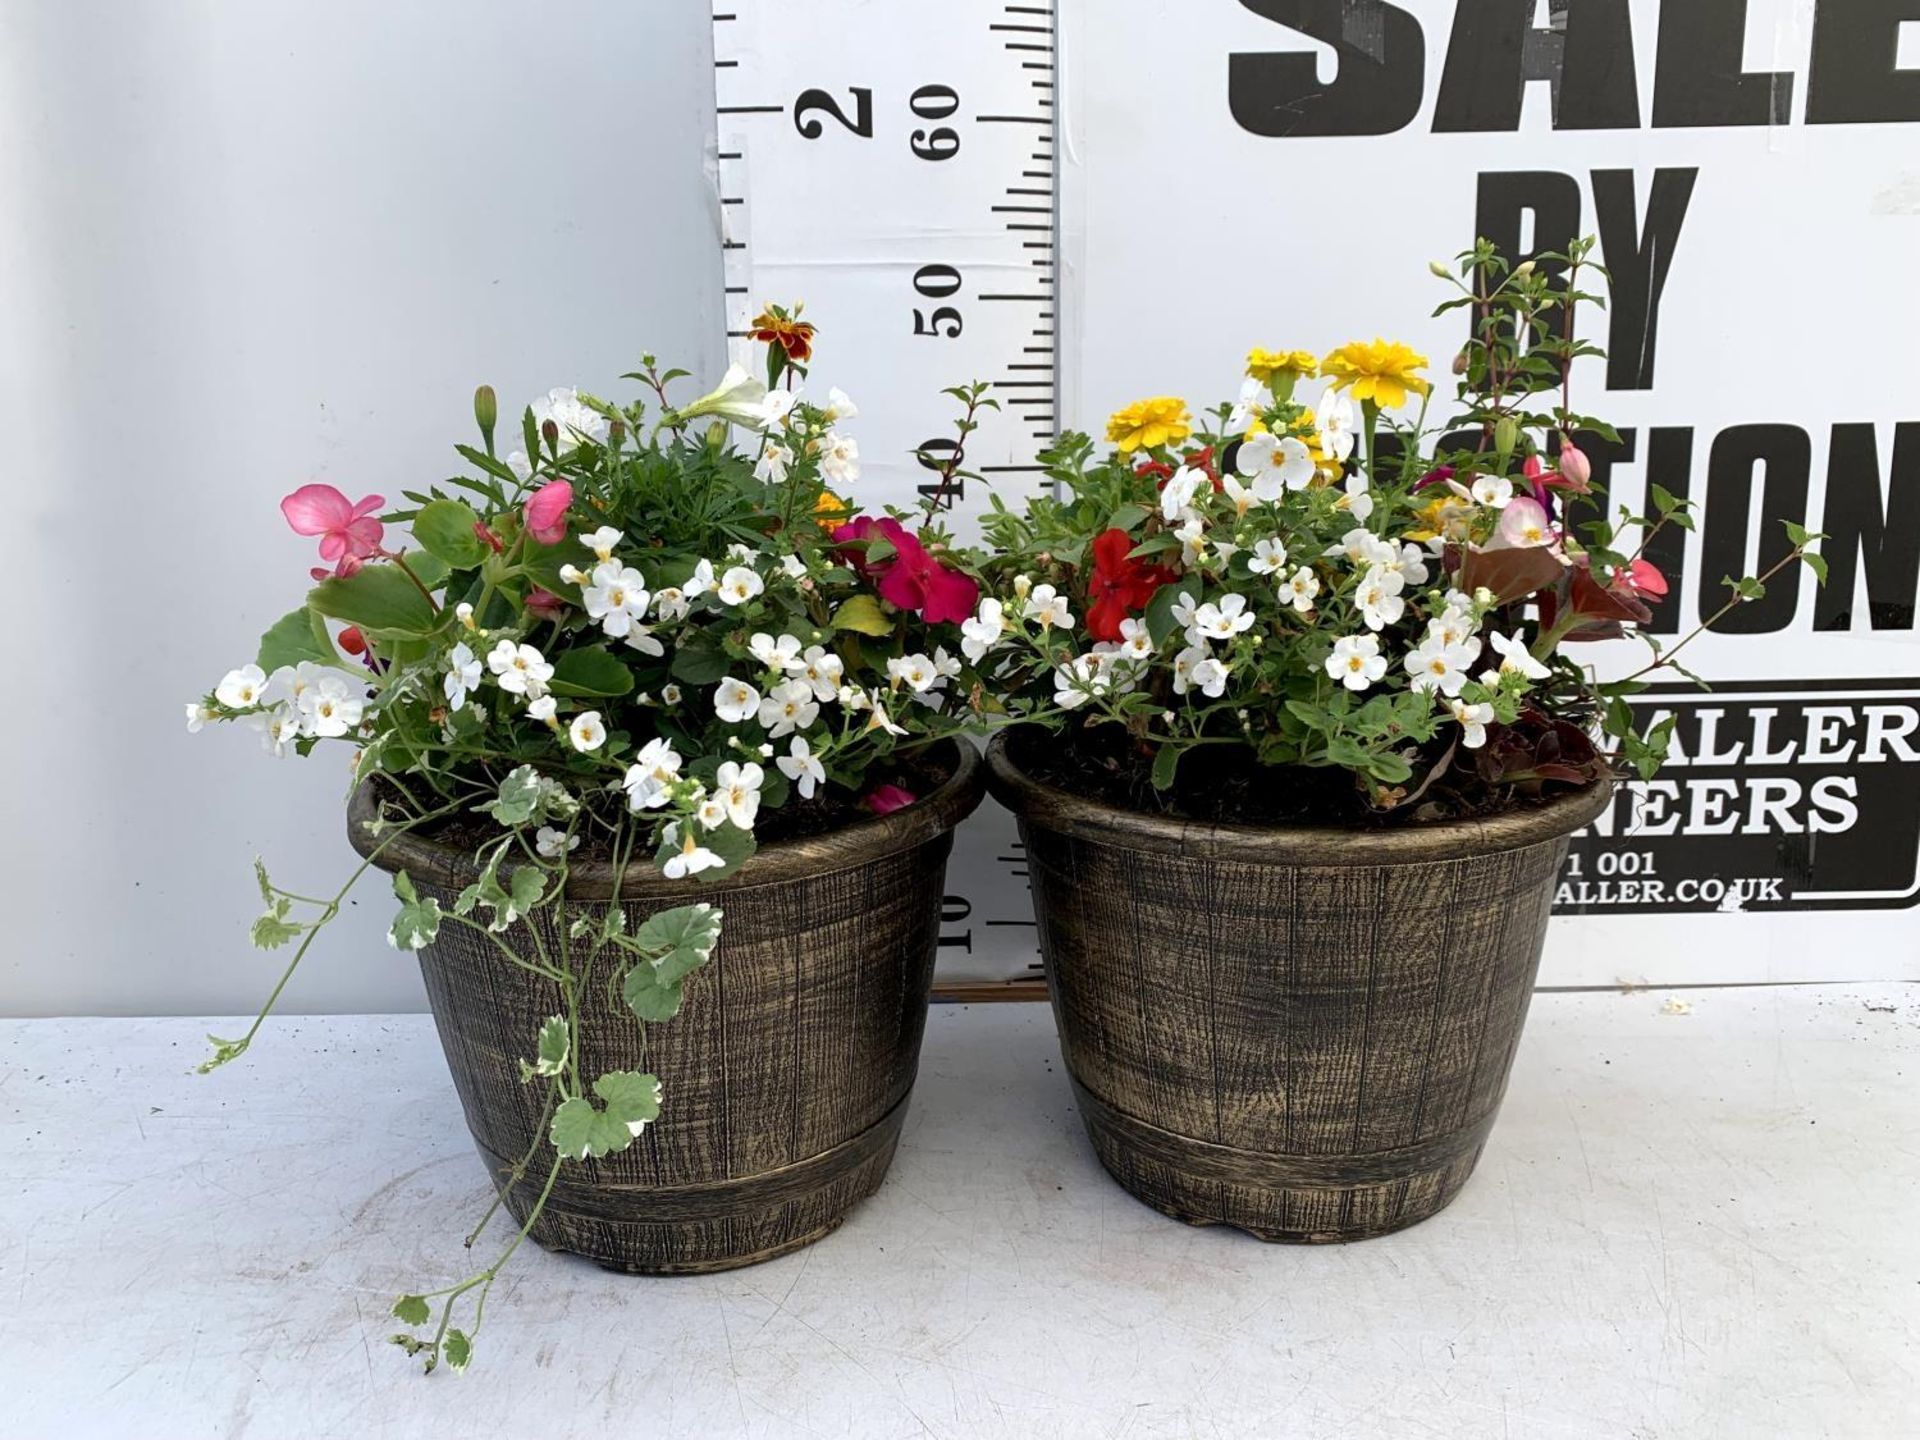 TWO LARGE TUBS PLANTED WITH VARIOUS PLANTS INC MARIGOLDS PETUNIAS FUCHSIA BACOPA ETC IN 10 LTR - Image 2 of 8